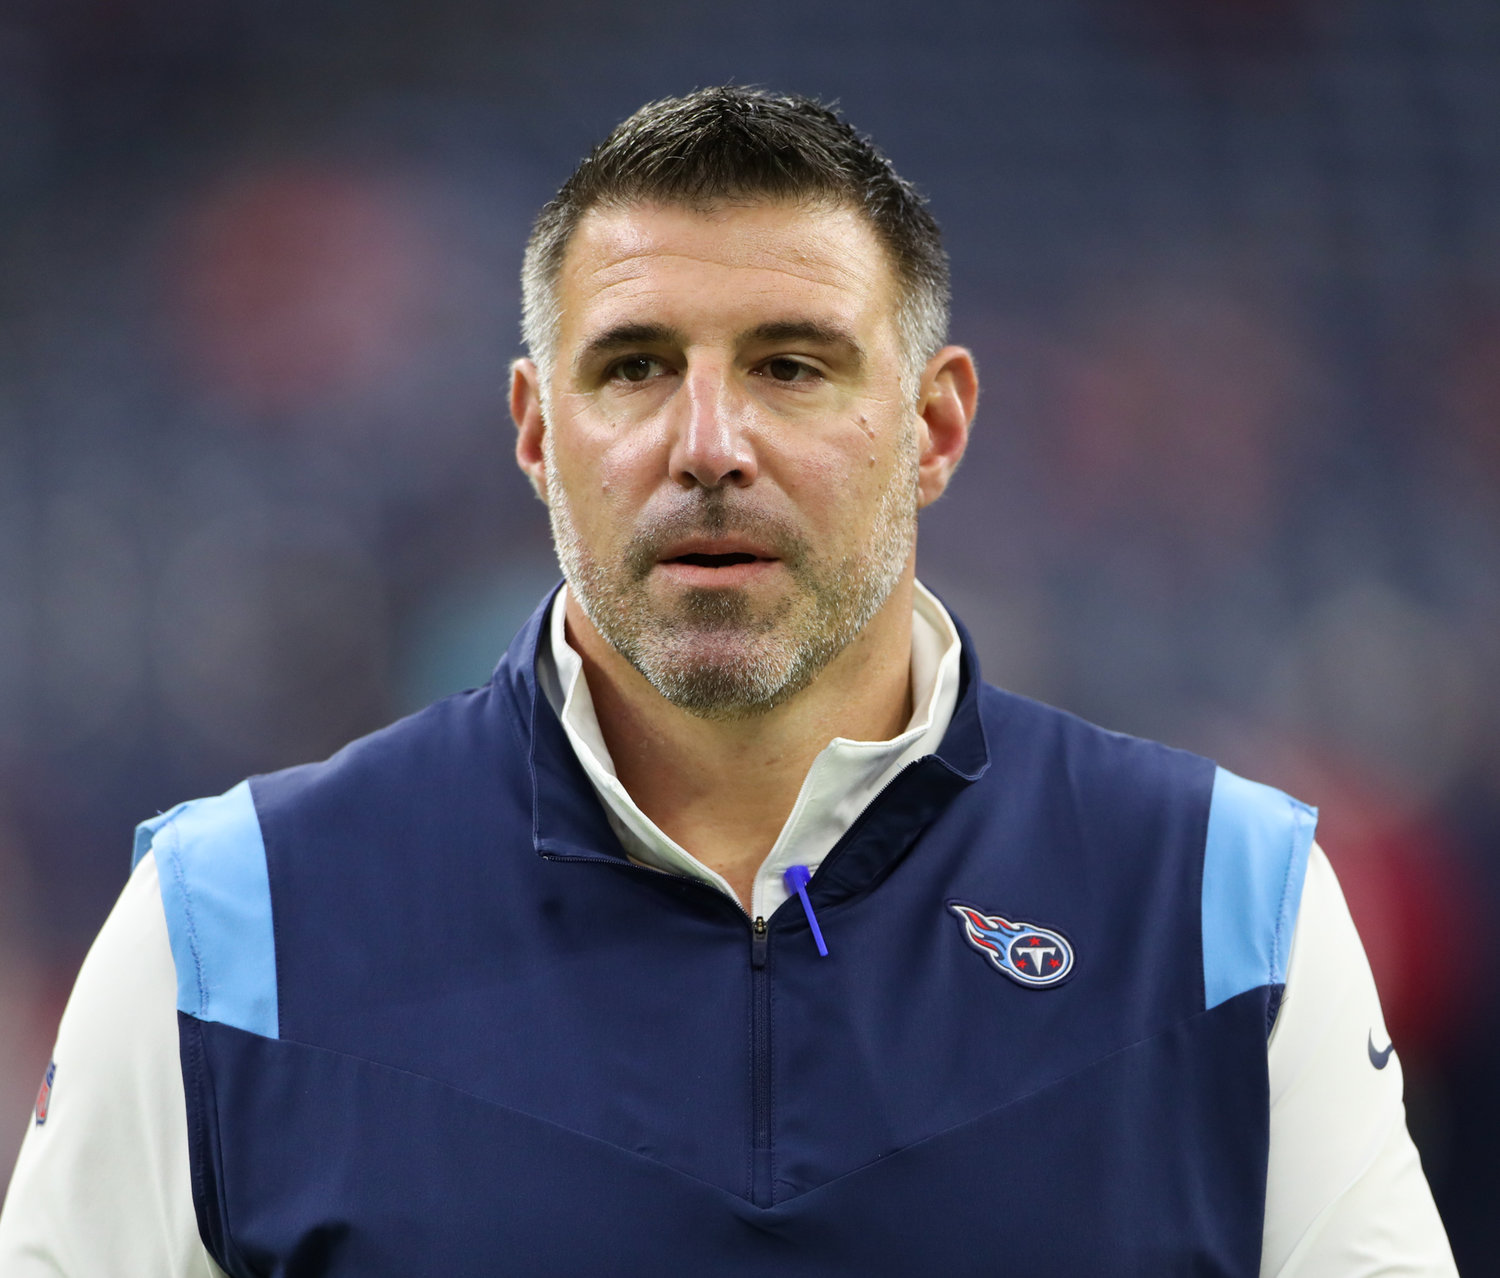 Tennessee Titans head coach Mike Vrabel before the start of an NFL game between the Texans and the Titans on Jan. 9, 2022 in Houston, Texas.